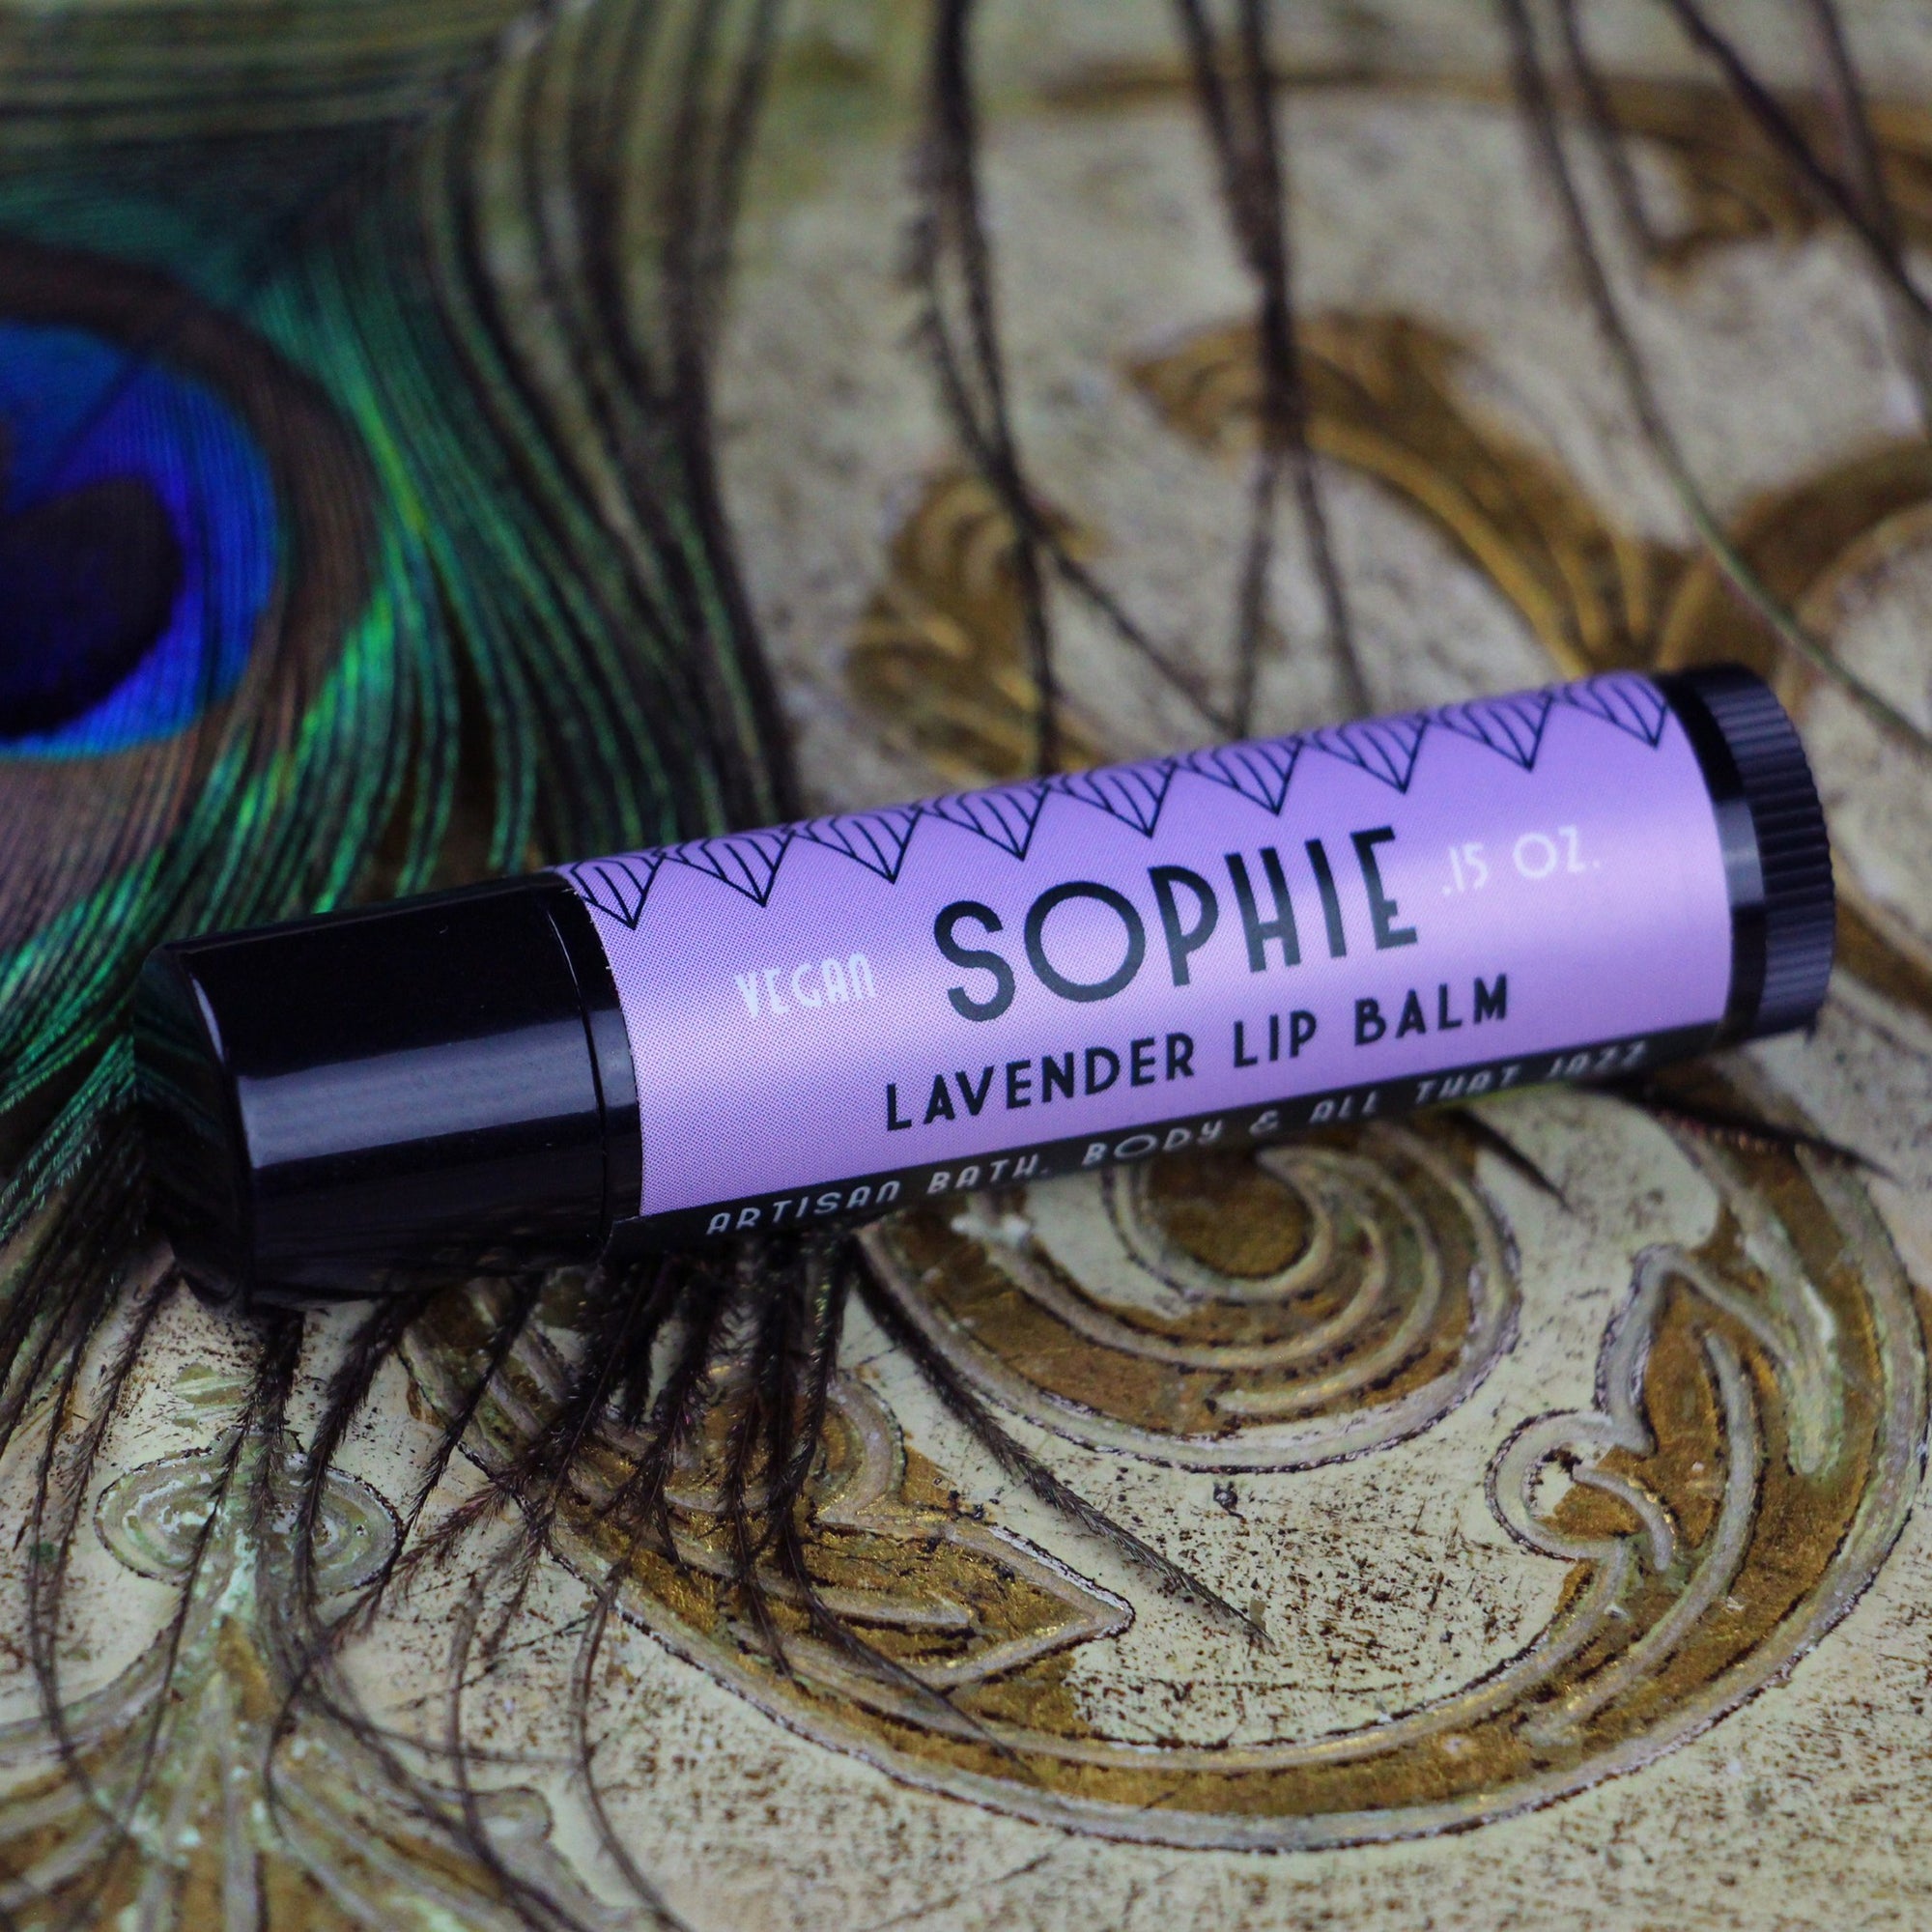 Sophie Lavender Lip Balm | Gilded Olive Apothecary